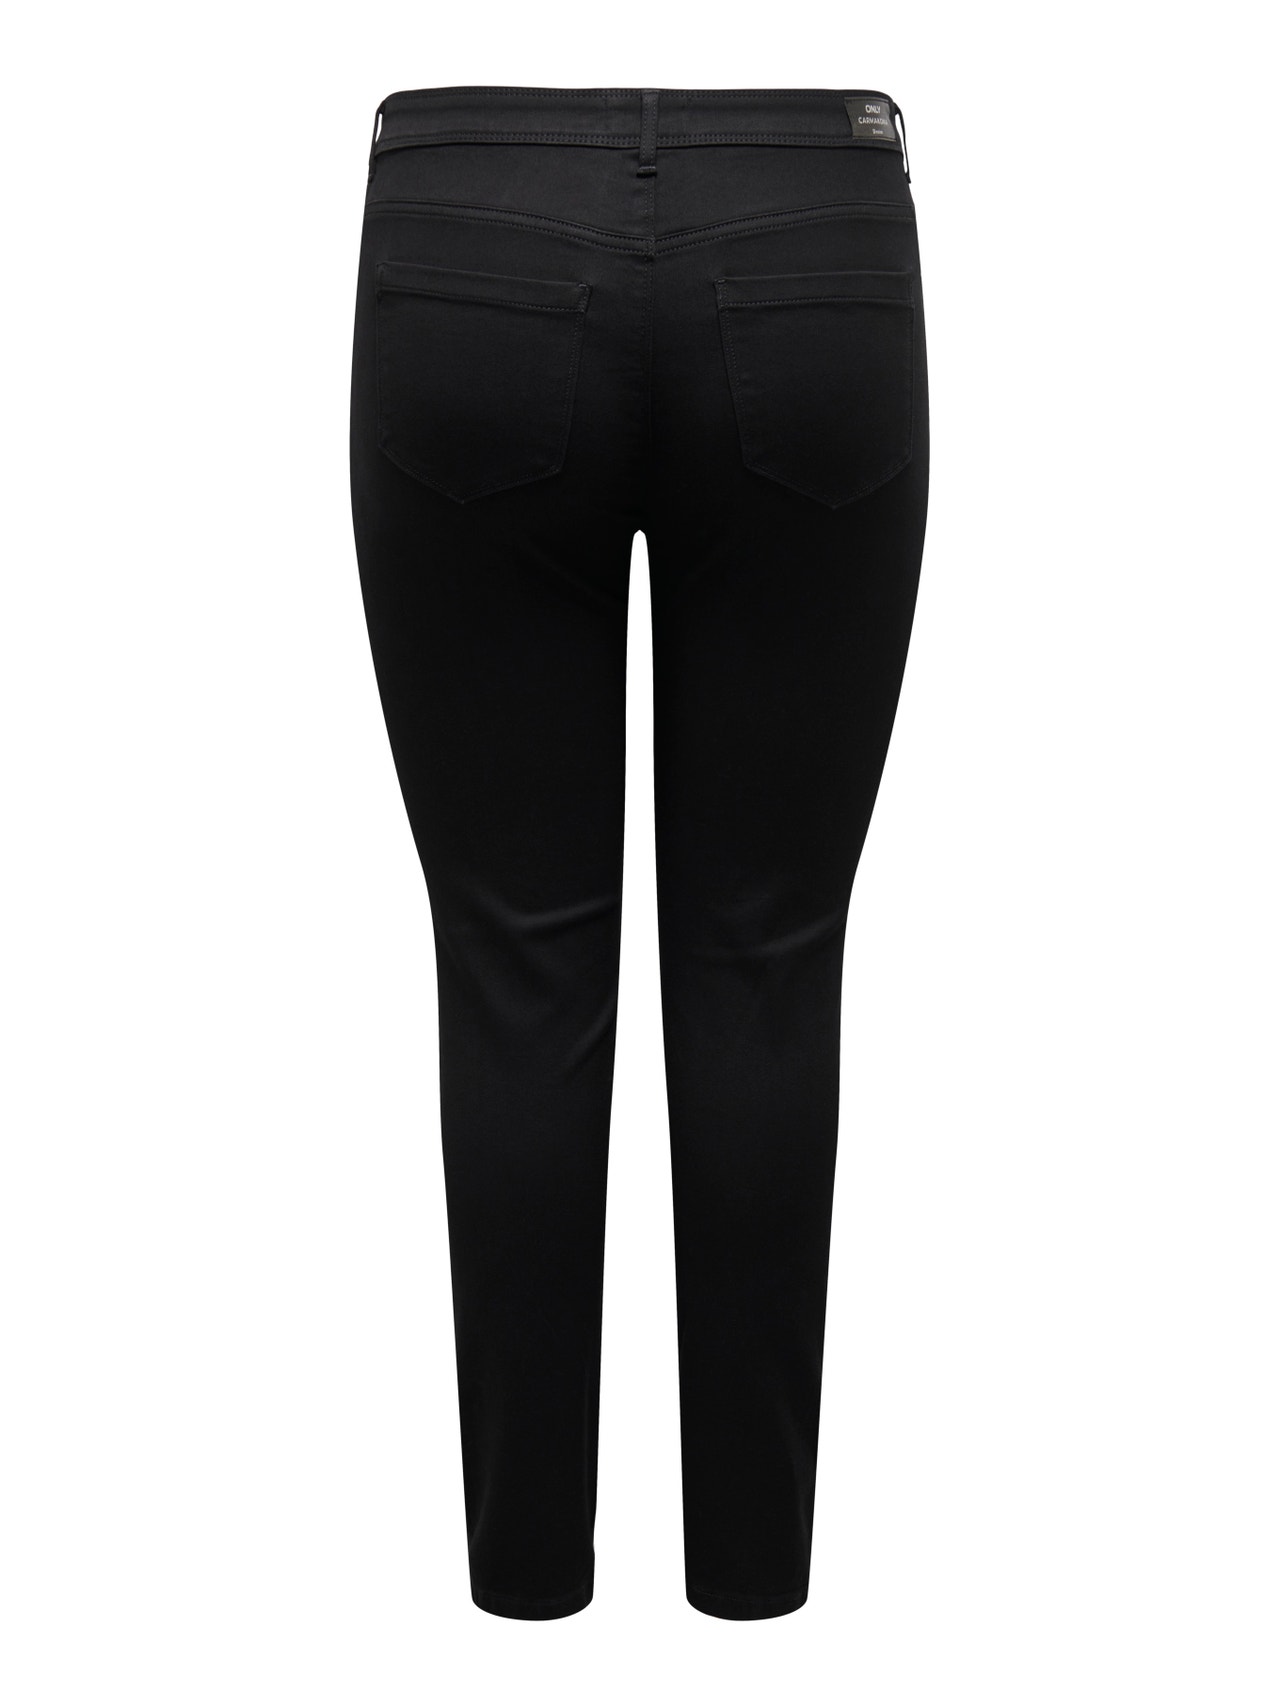 ONLY Jeans Skinny Fit Taille moyenne -Black Denim - 15307662